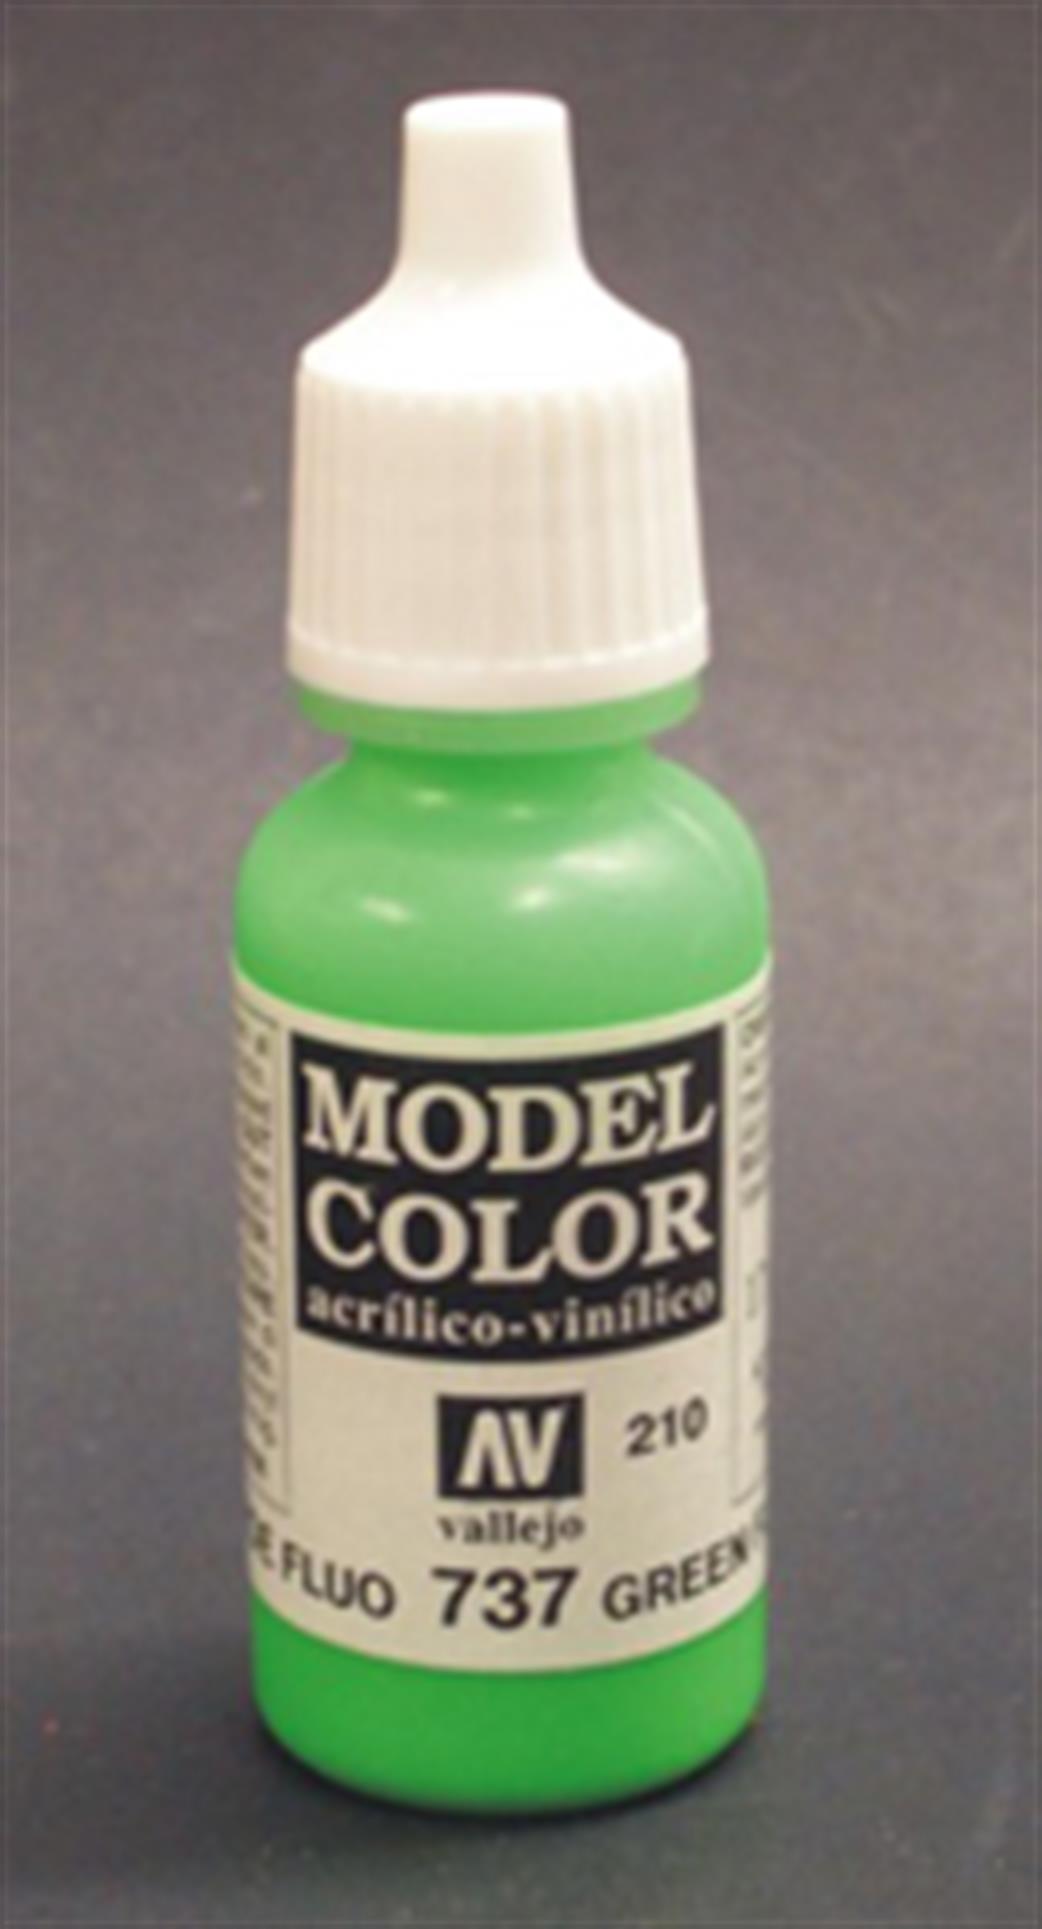 Vallejo  70737 737 Model Color Fluorescent Green Acrylic Paint 17ml 210